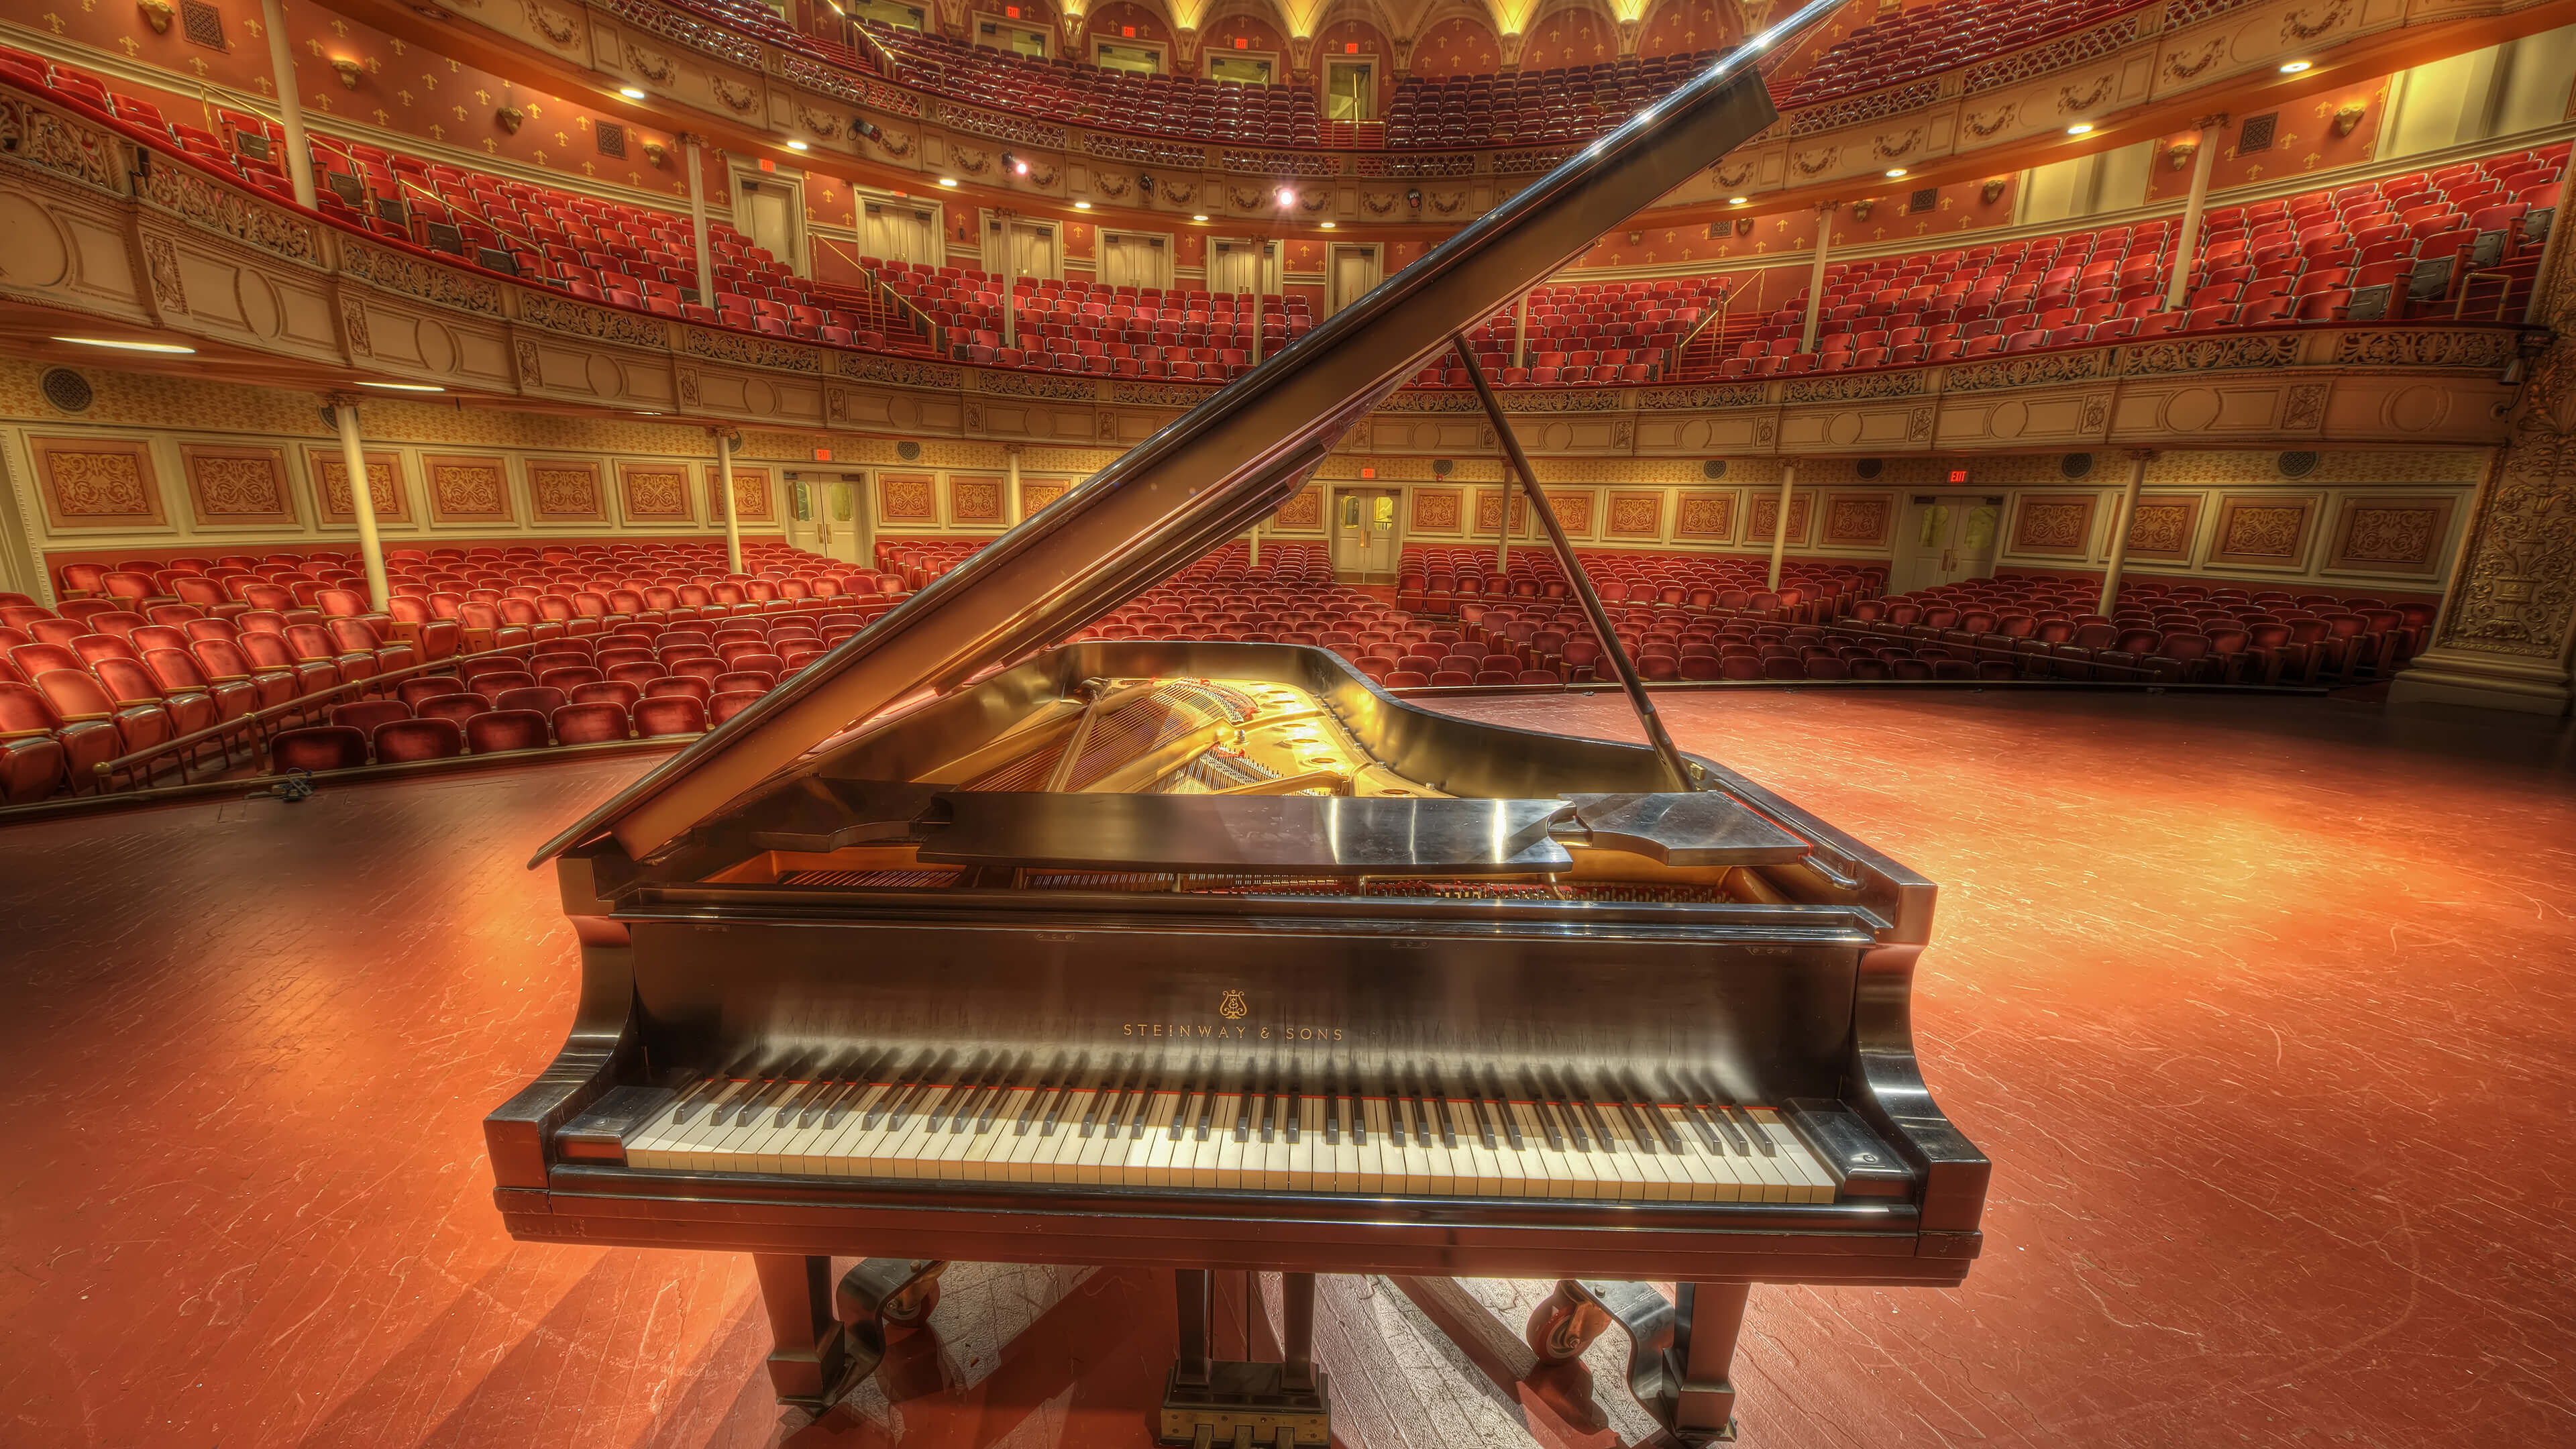 Fortepiano: Steinway And Sons Grand Piano, Carnegie Music Hall In Pittsburgh. 3840x2160 4K Wallpaper.